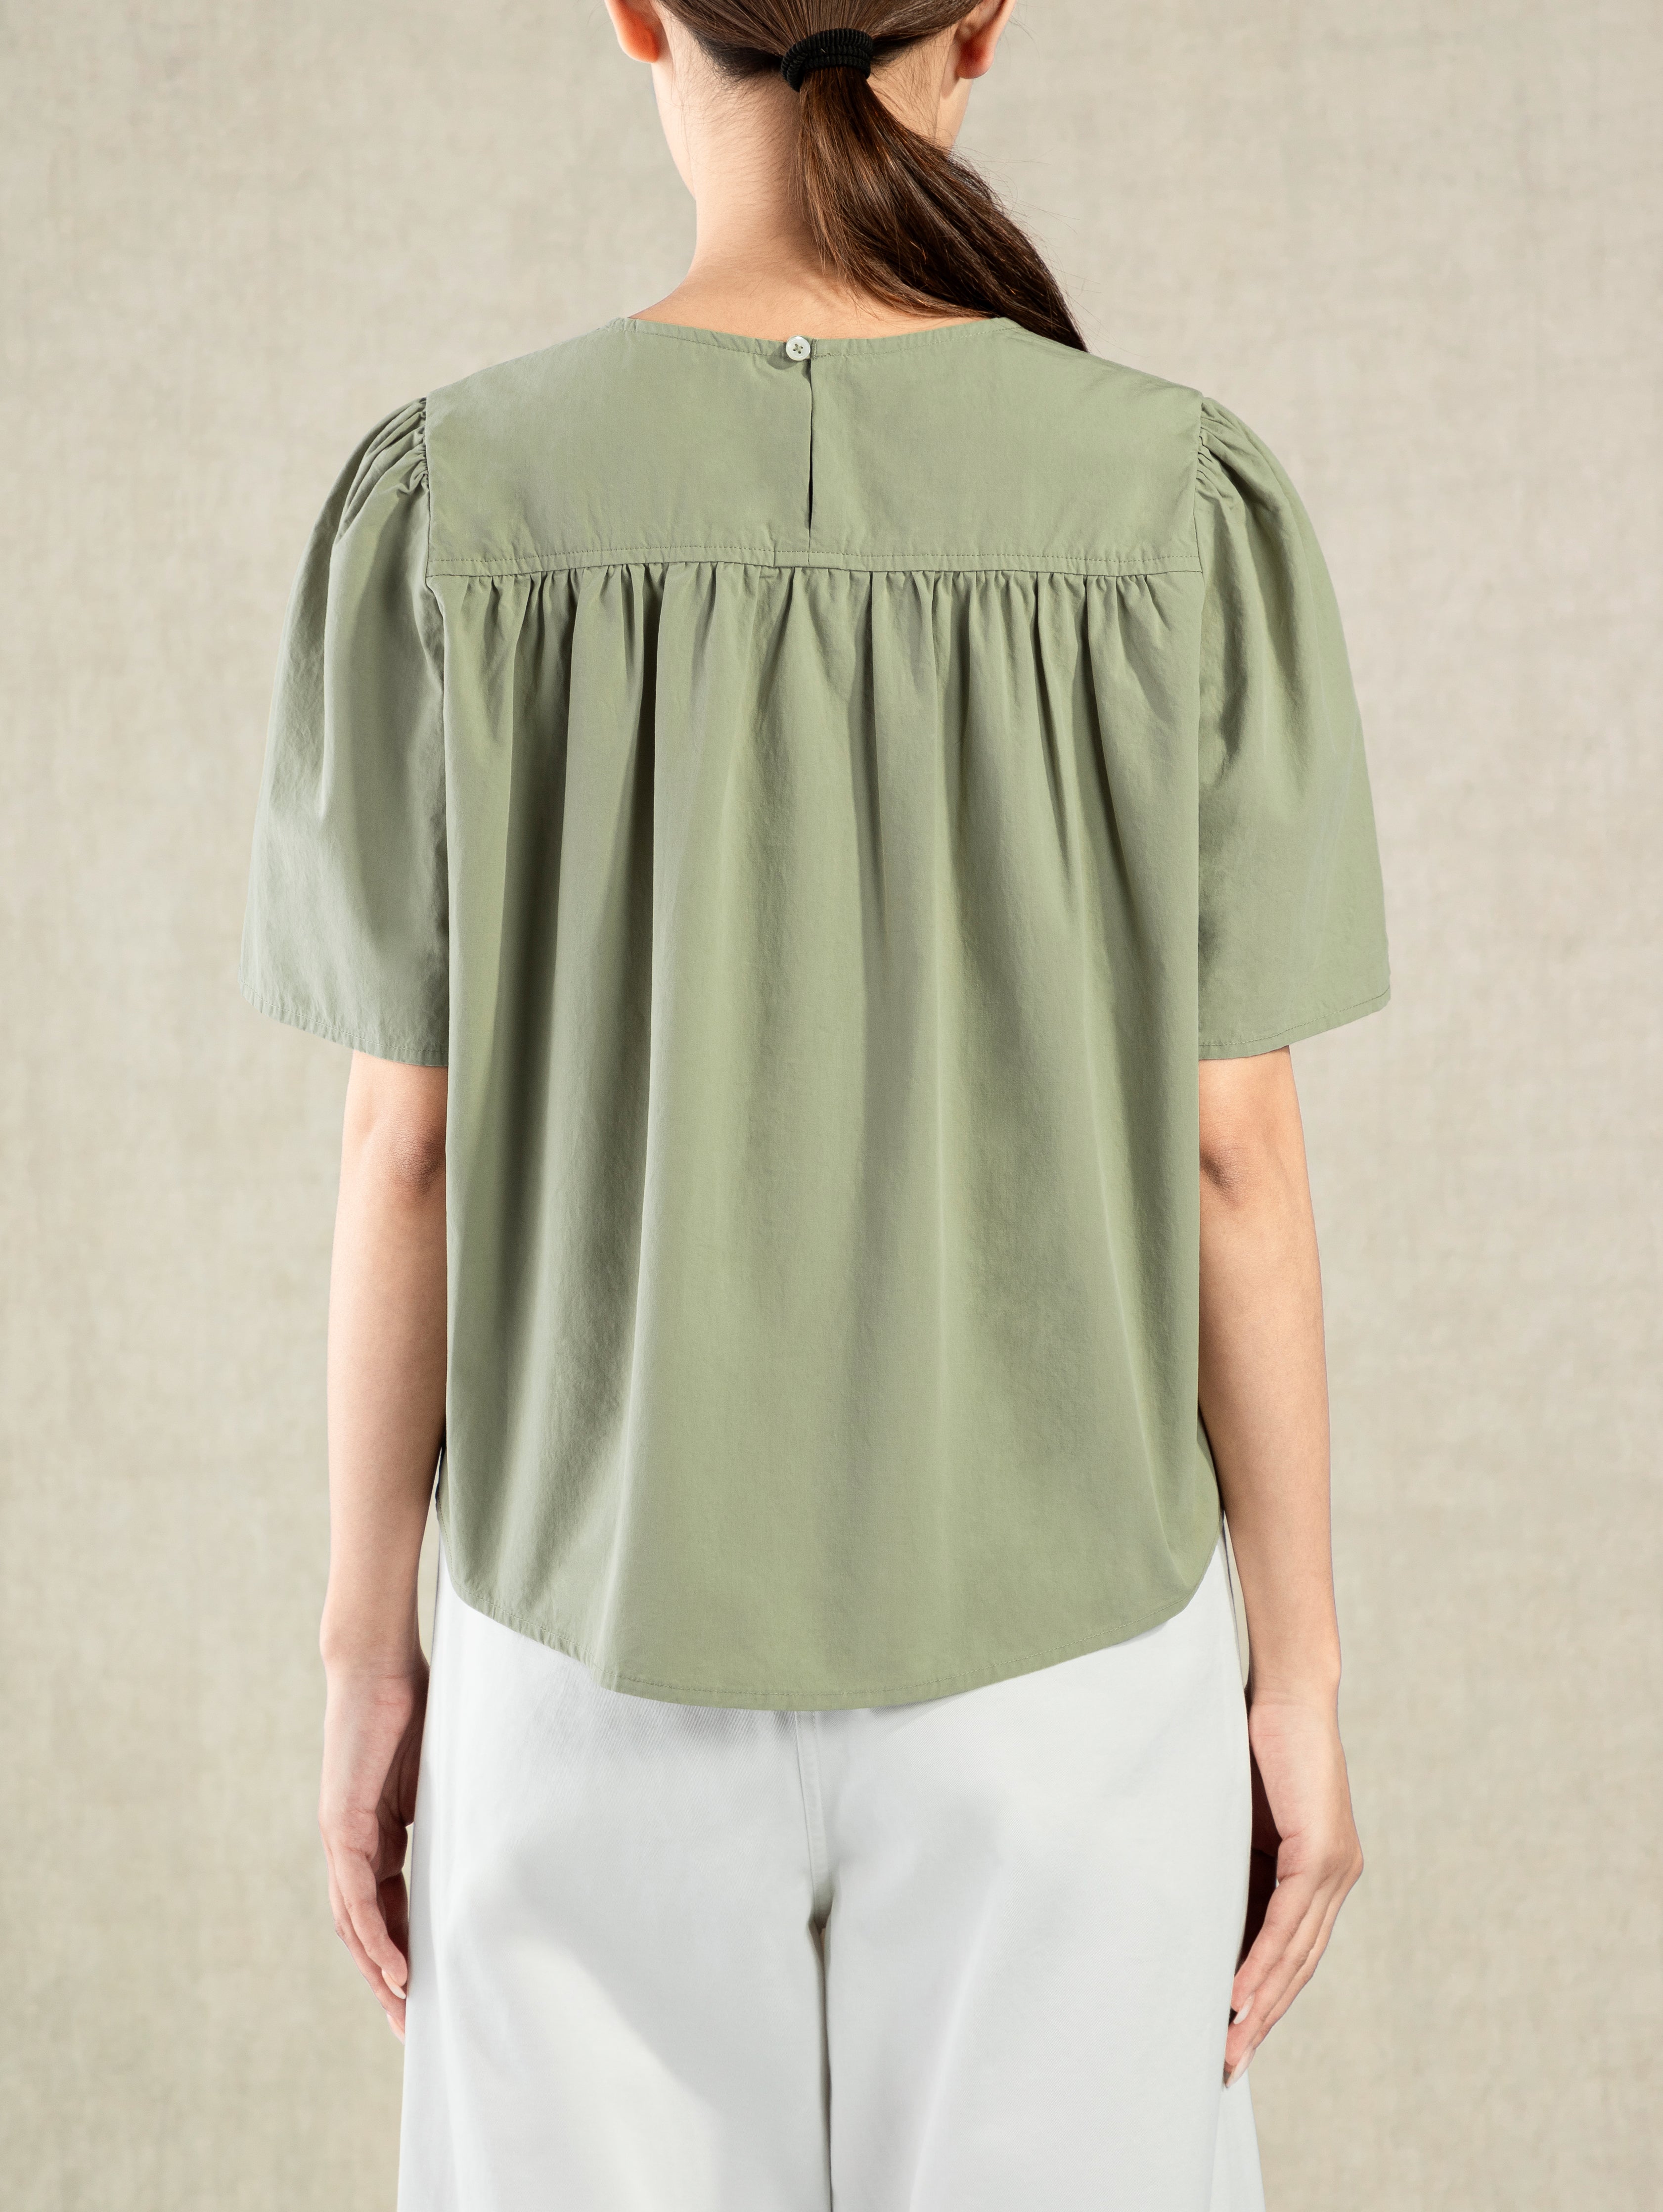 Shadow Green Puff Sleeve Blouse Womens Relaxed Fit Shirt